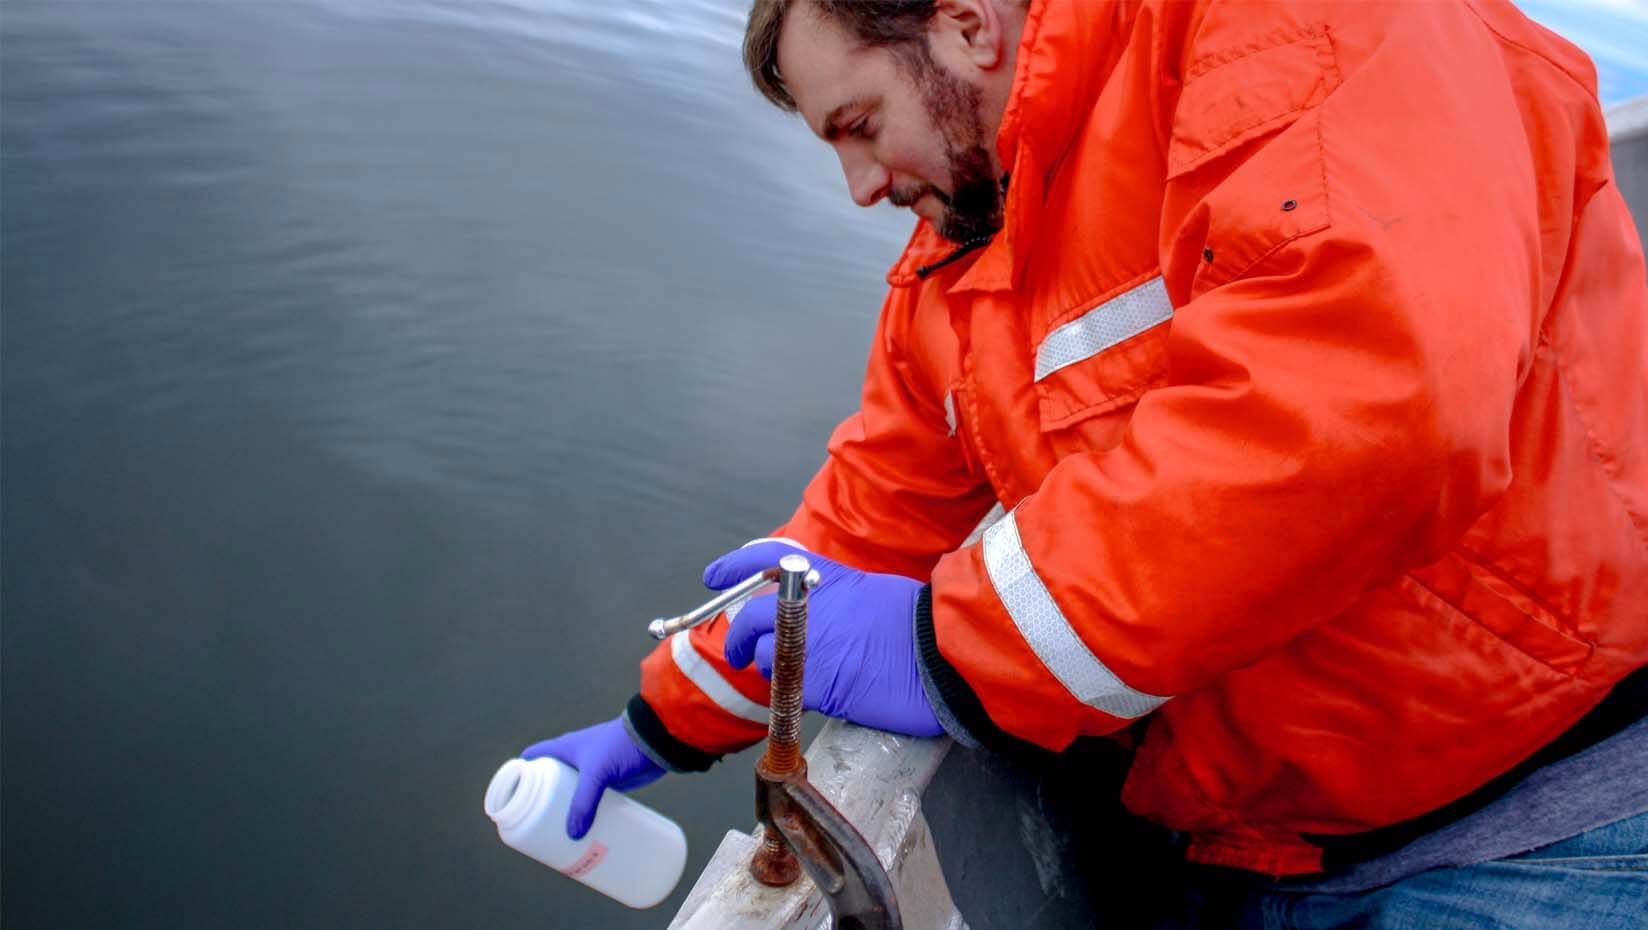 A photo of a person taking a water sample